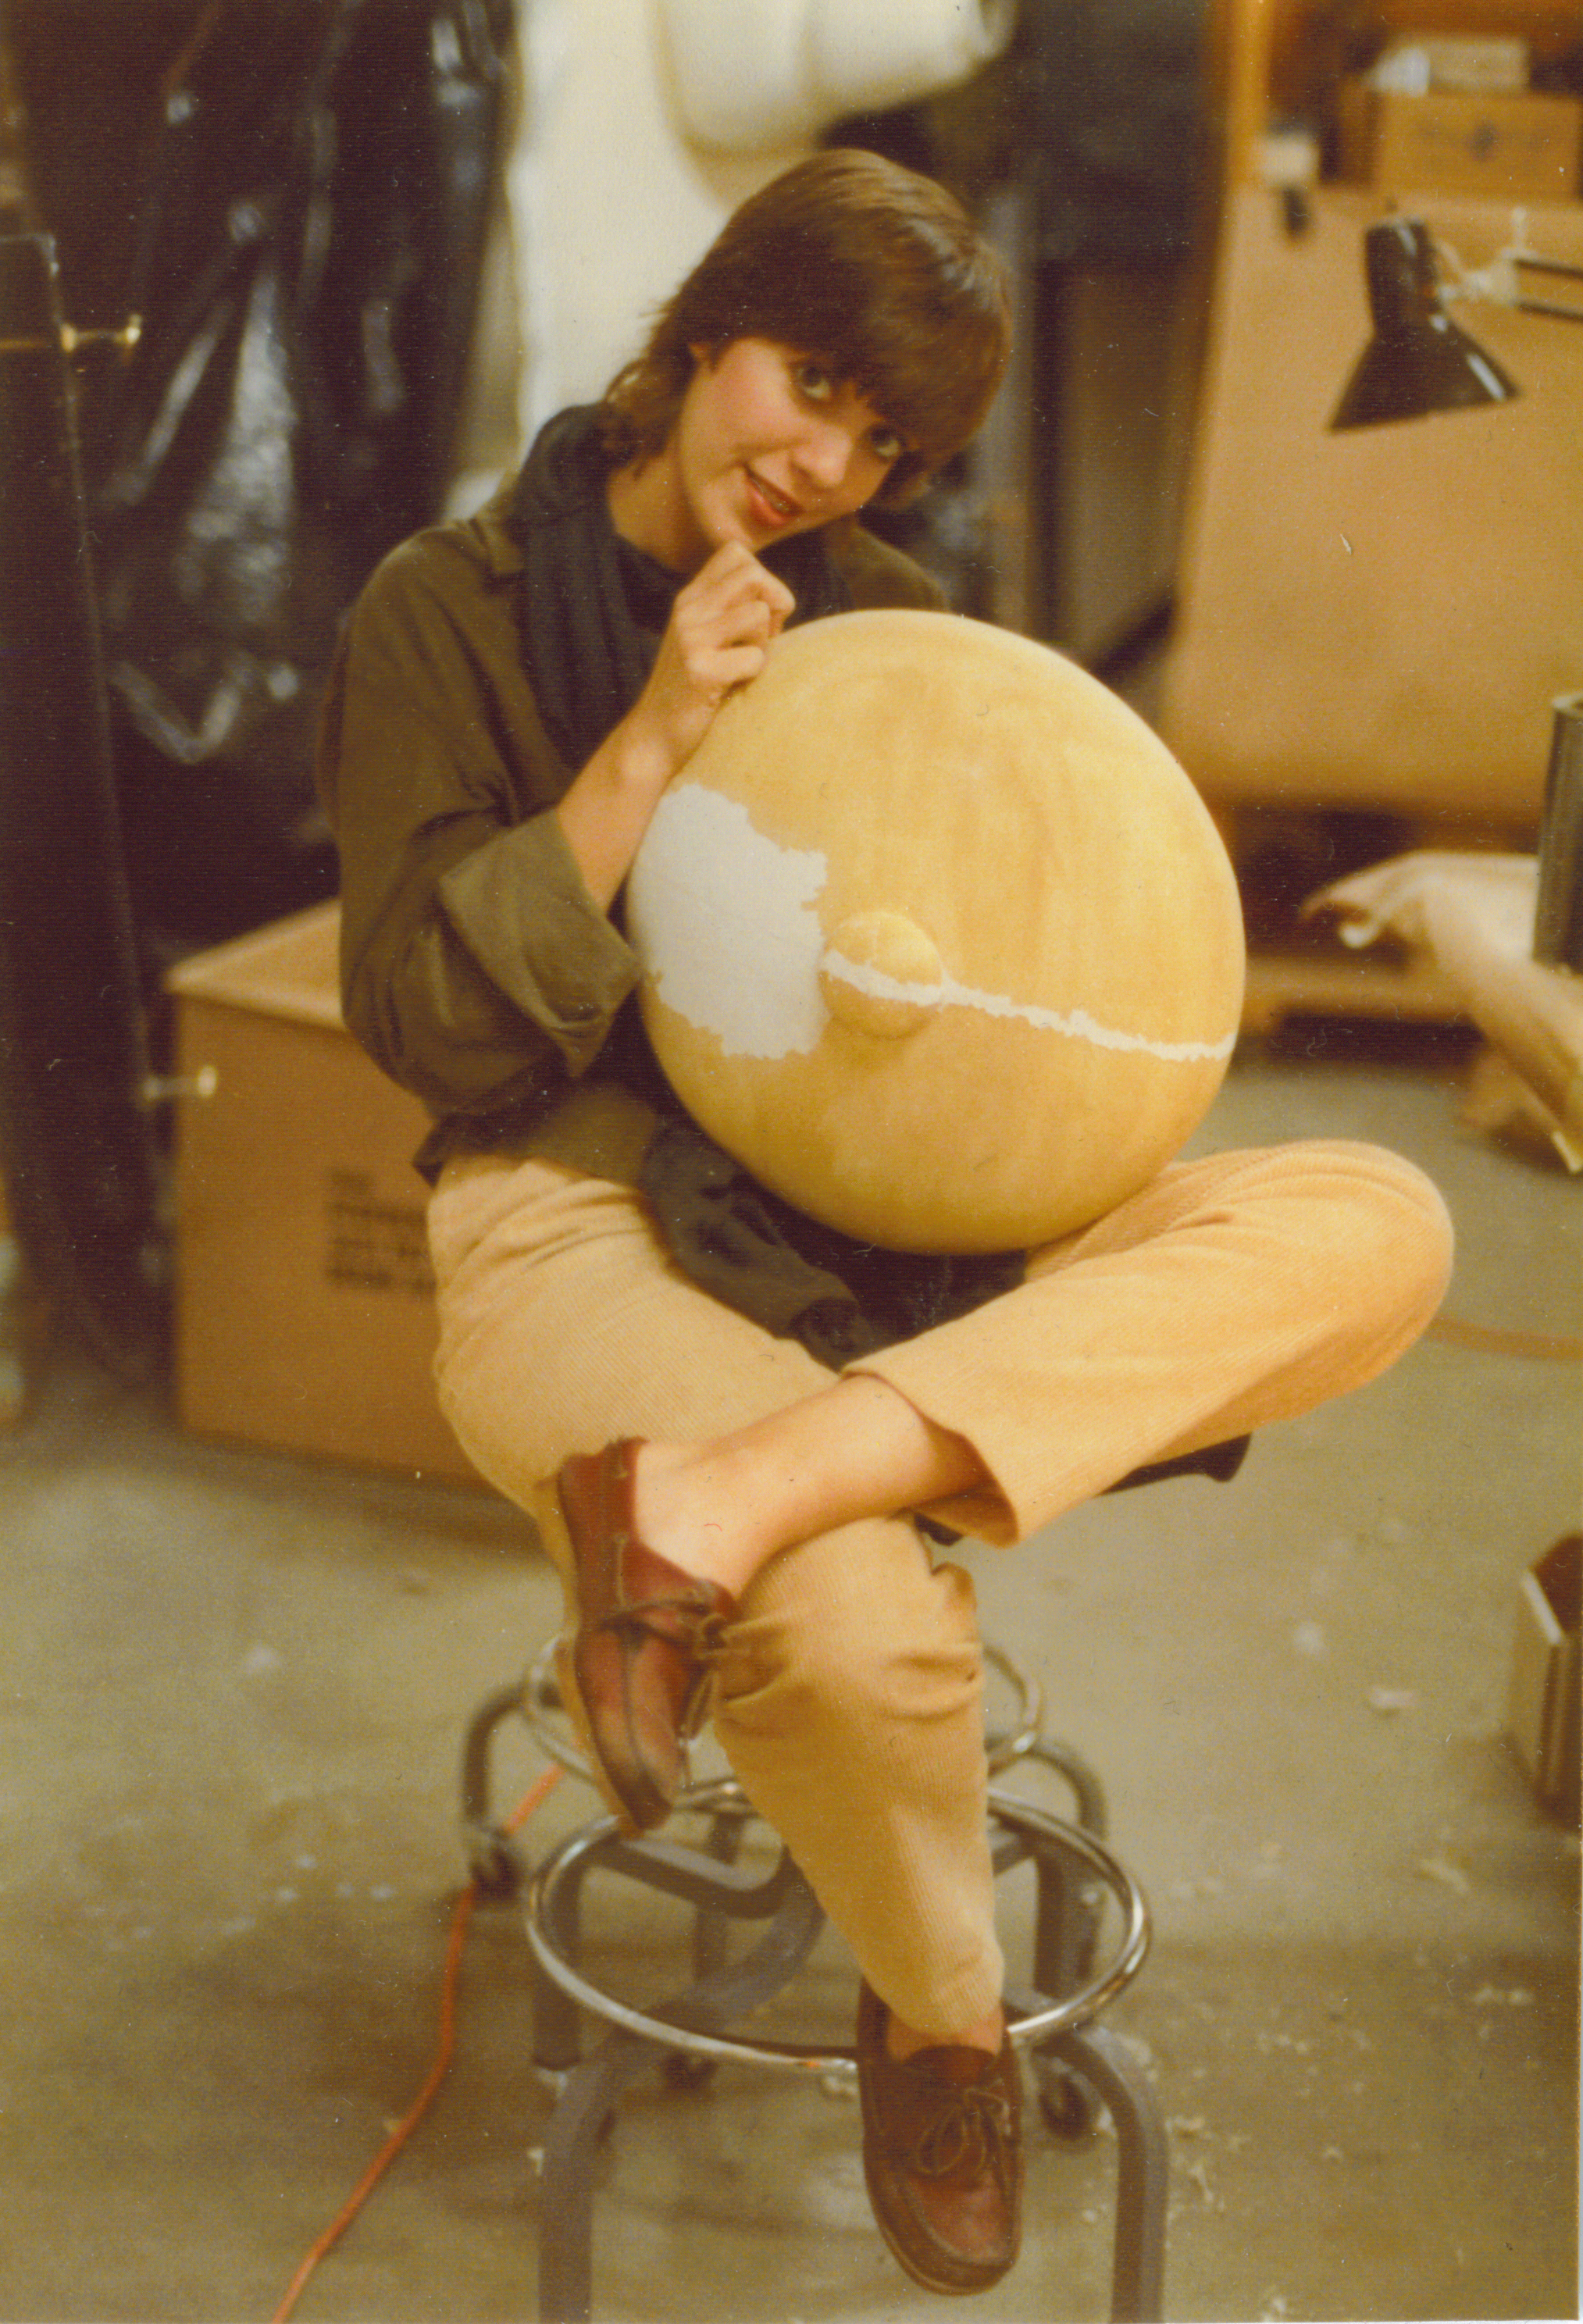 Diana (Williams) Hamann seaming one of the Stay-Puft hats. Ghostbusters.